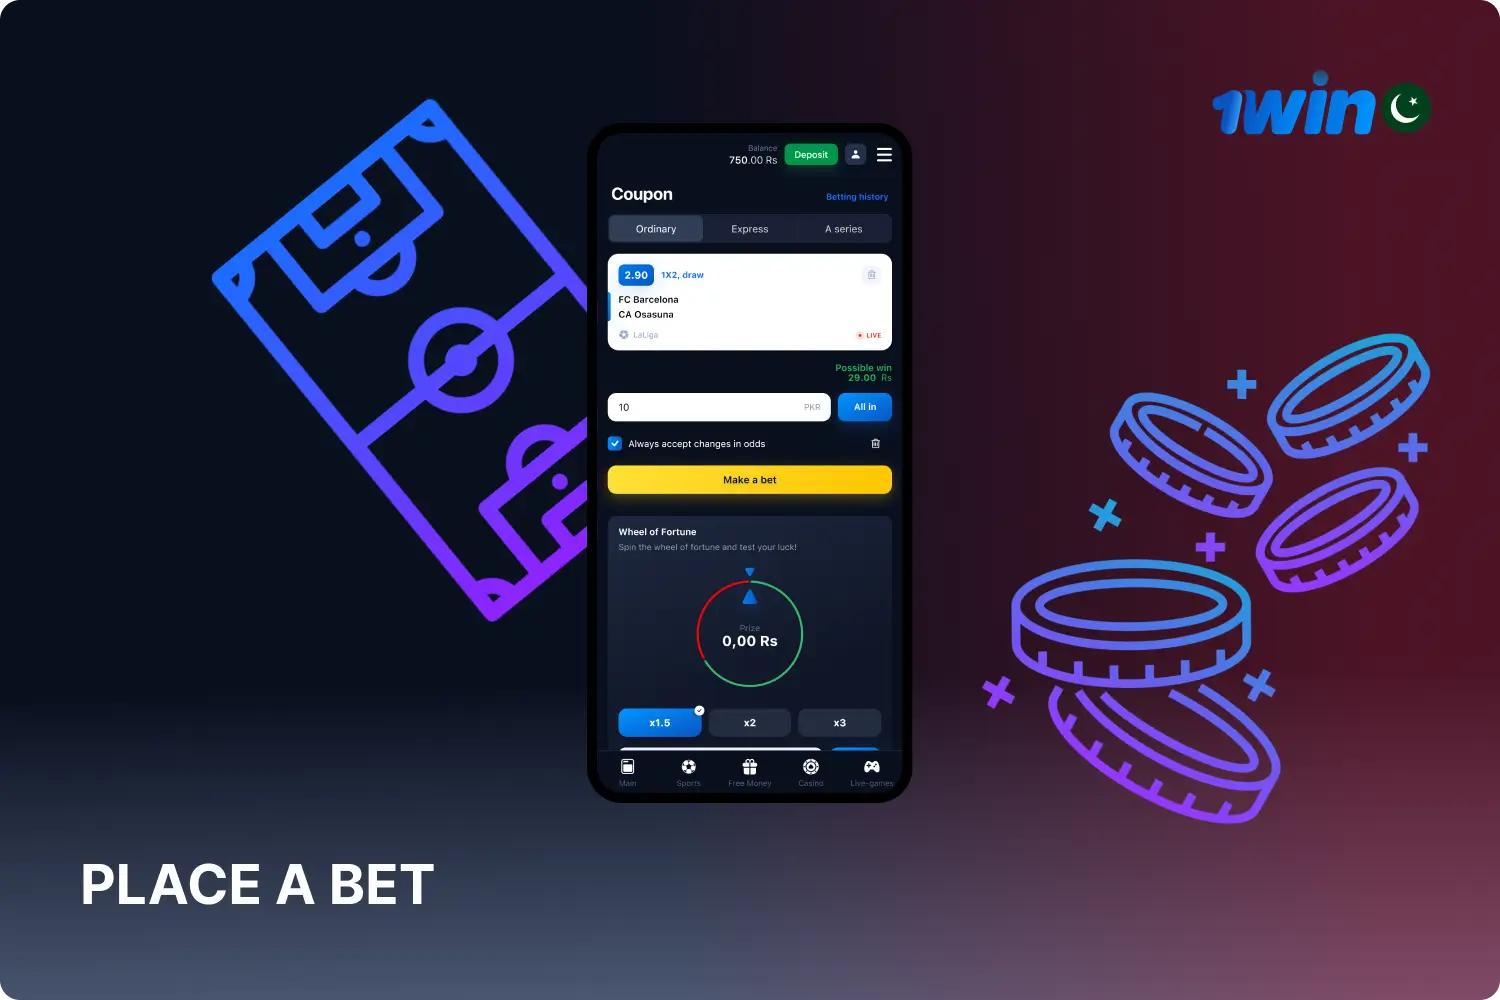 After selecting a sporting event and the desired odds, the player needs to enter the bet amount and confirm it by clicking the bet button